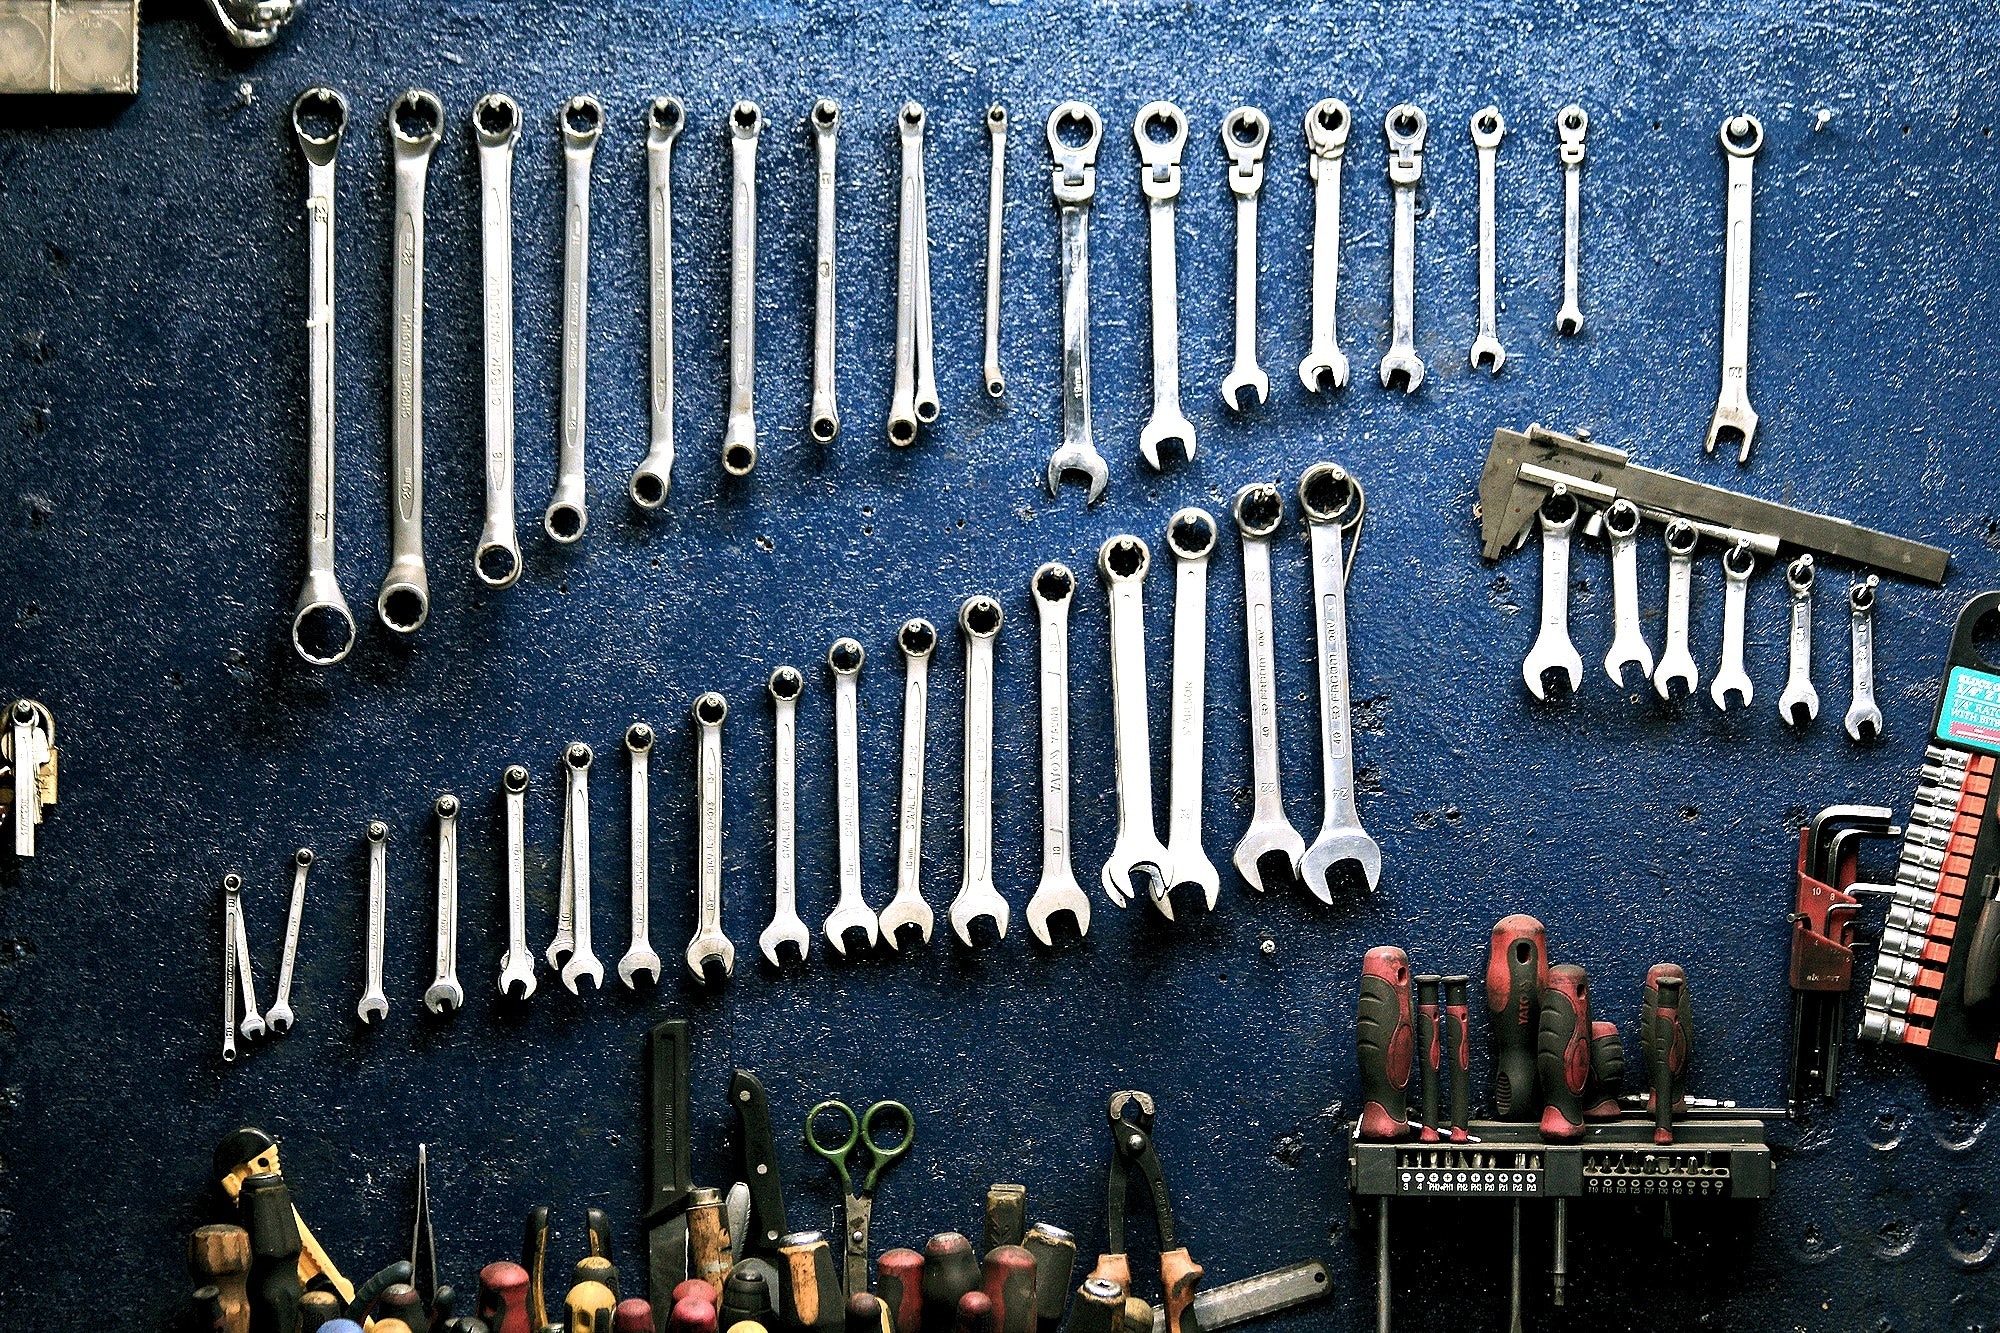 Multiple spanners of various sizes hanging on a blue-colored wall